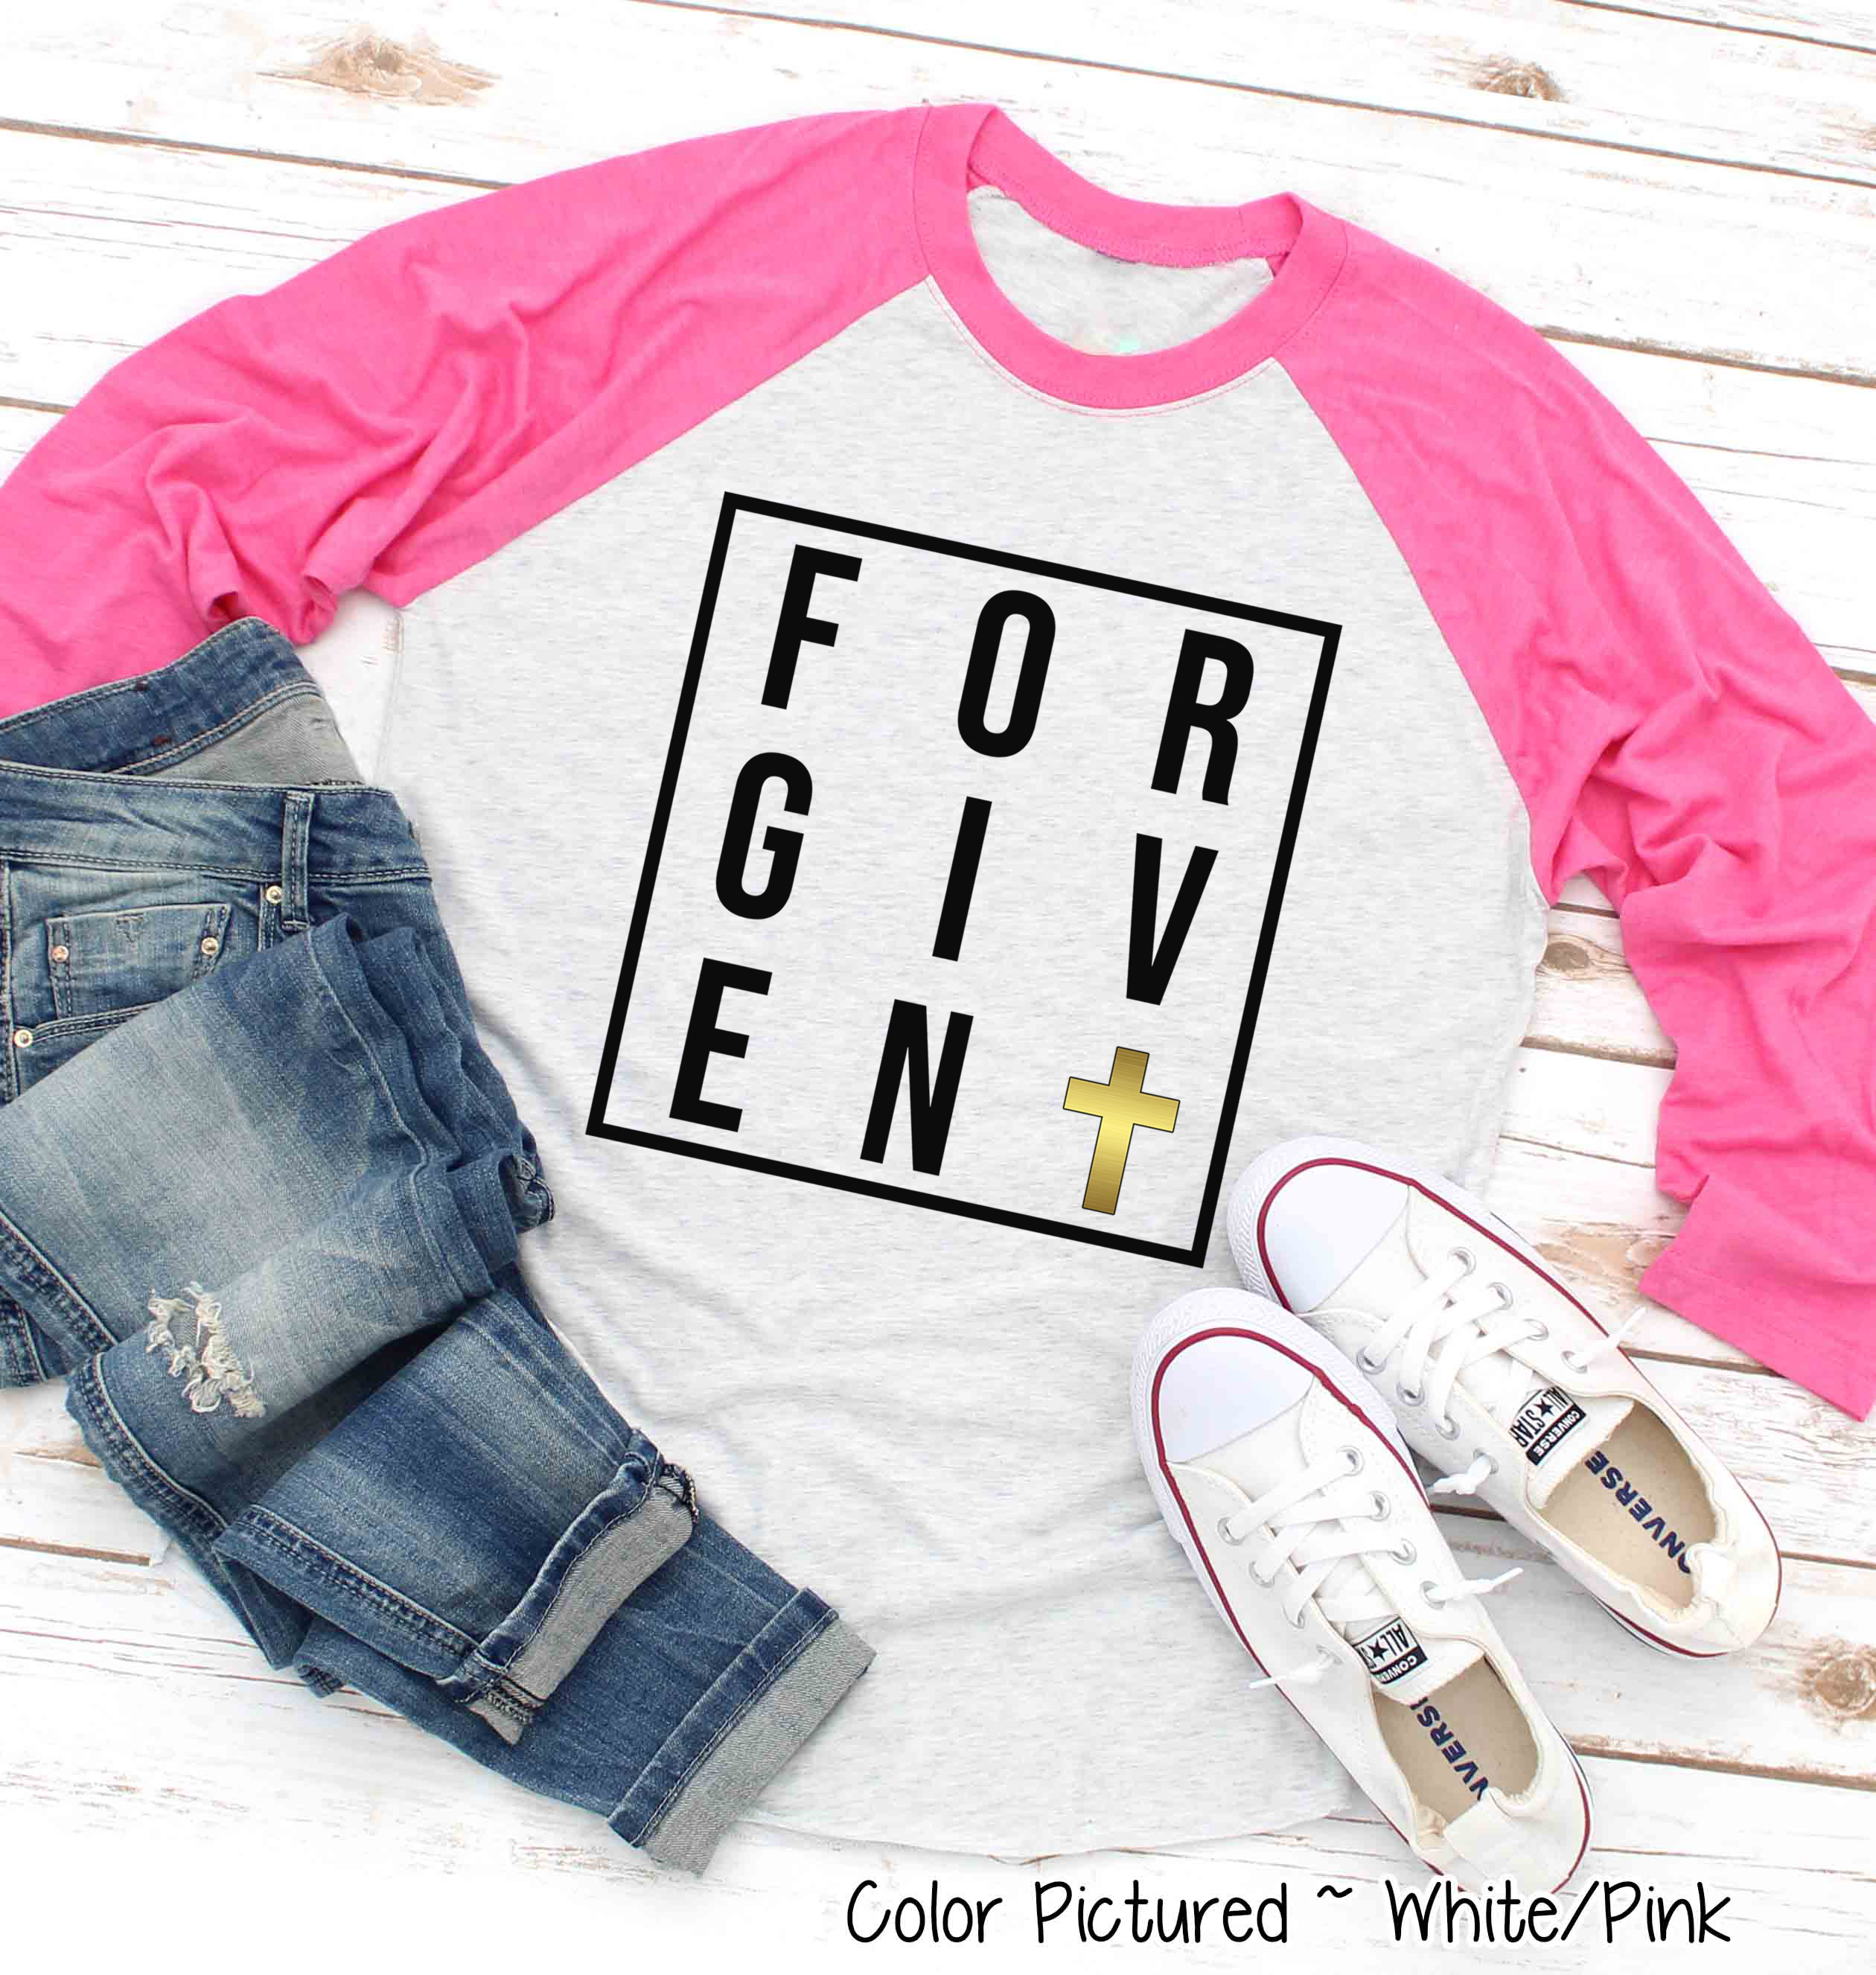 Forgiven with Gold Cross Easter Raglan Tee